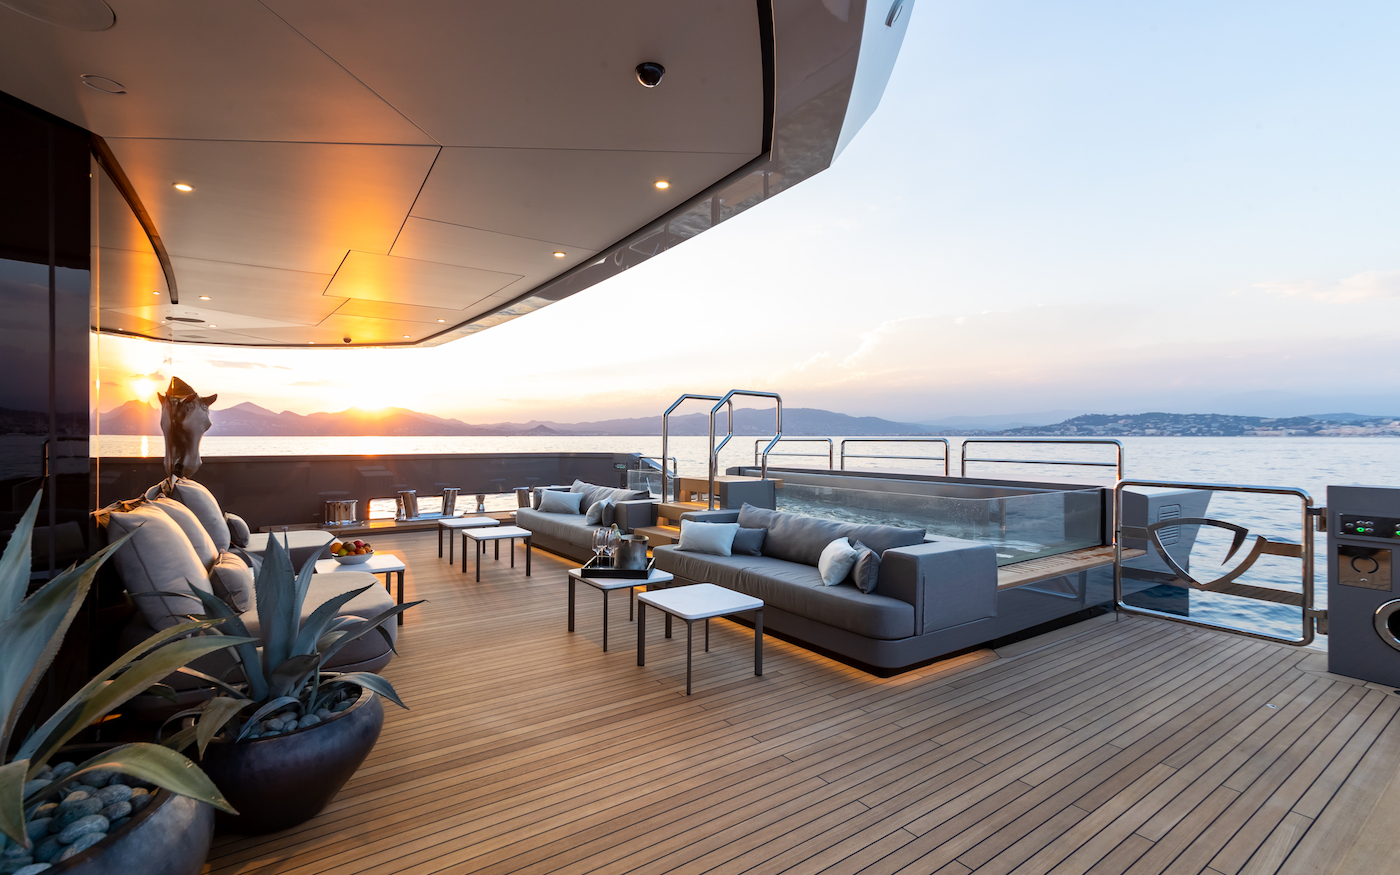 Aft Deck Jacuzzi And Seating Area